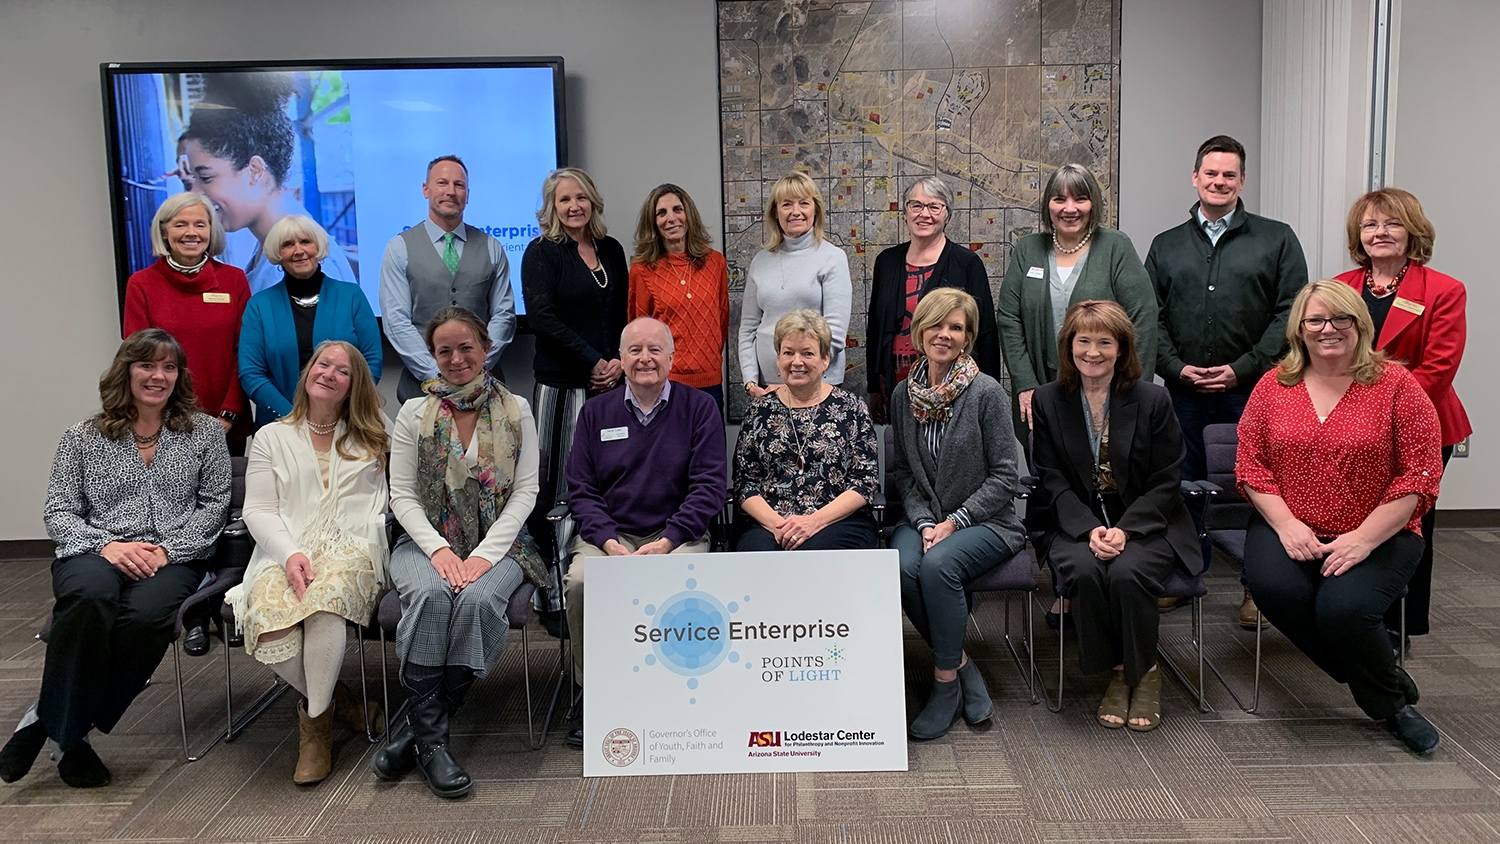 Members of the Arizona Service Enterprise Initiative's 17th cohort stand and sit in chairs inside a conference room. Behind them is a large monitor and map. In front of them is a sign reading "Service Enterprise, Points of Light" with multiple logos.